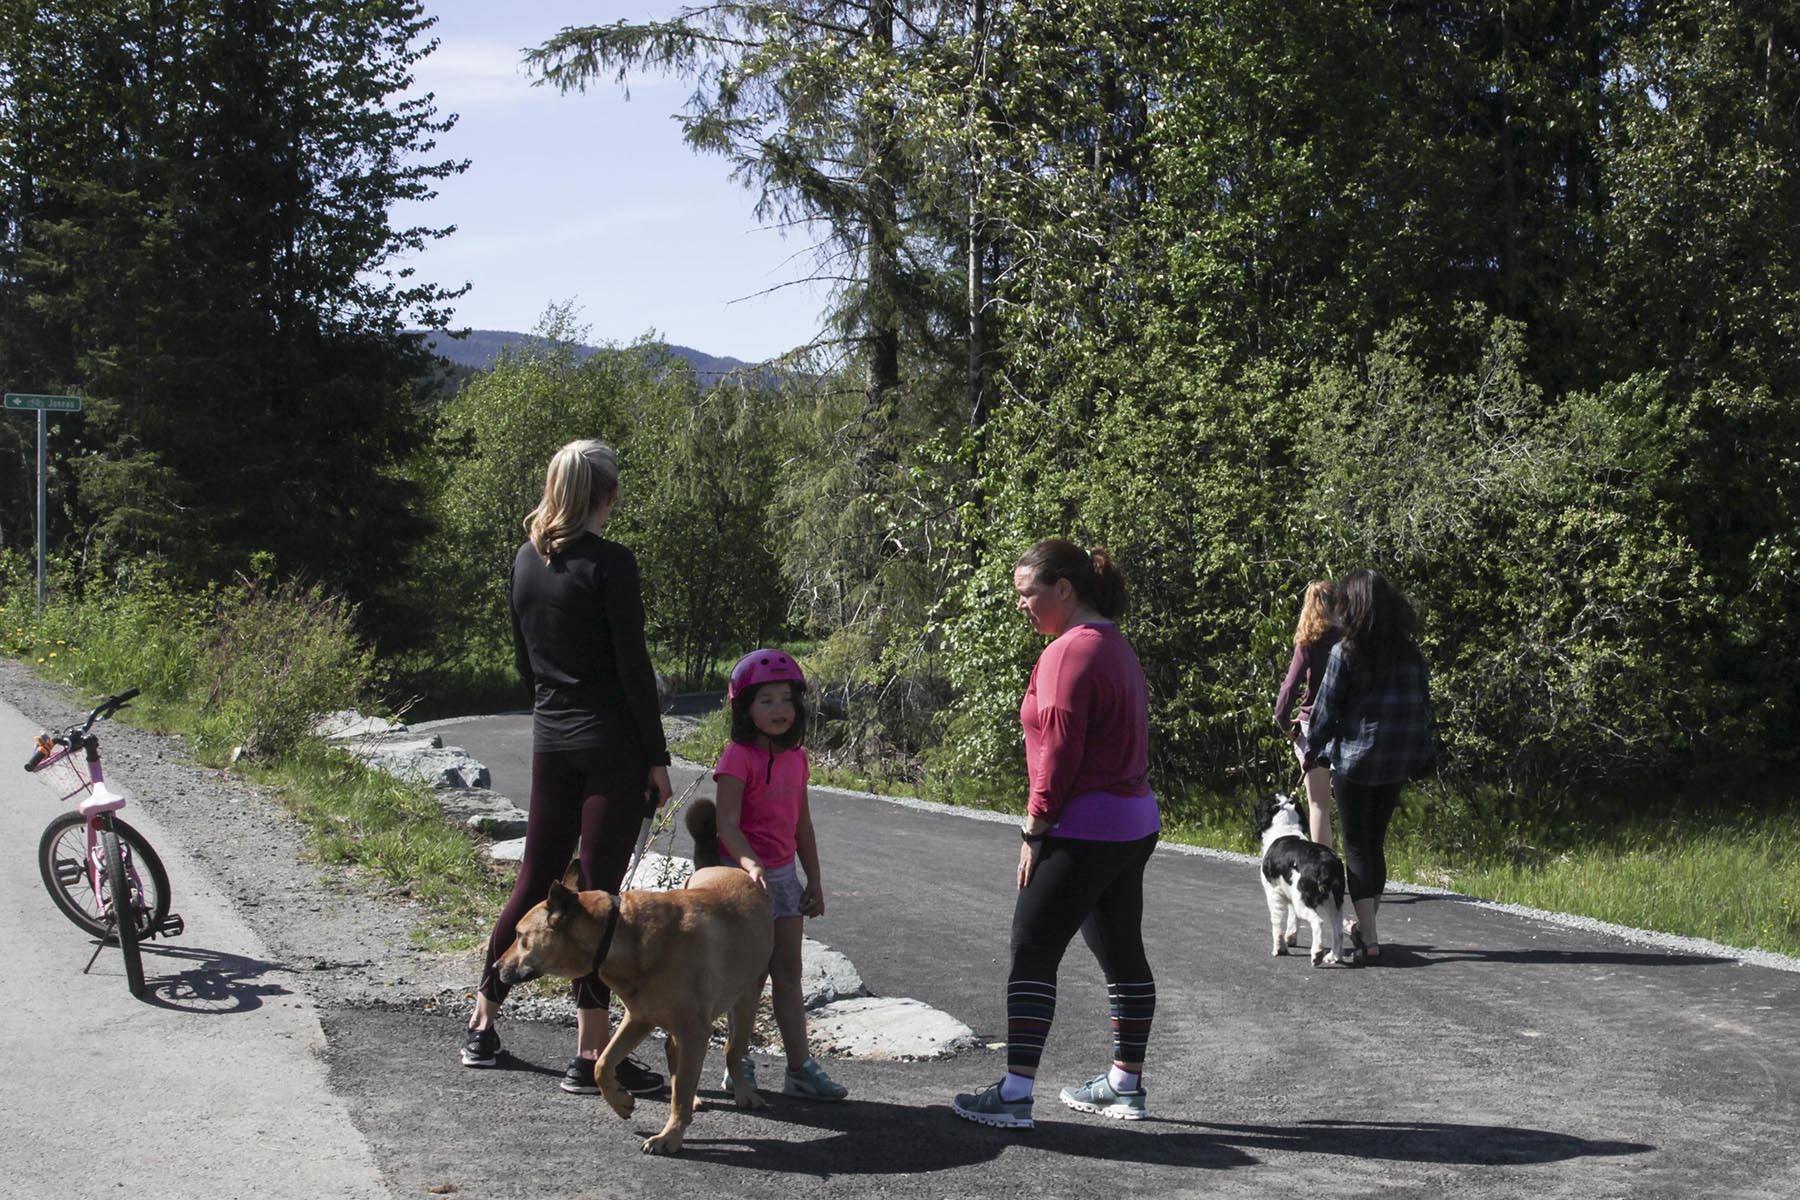 Juneau residents enjoy the newly repaved Kaxdigoowu Héen Dei (Brotherhood Bridge Trail) on May 27, 2020. The trail has been moved, repaved, and reopened after riverbank erosion threatened the original trail. (Michael S. Lockett | Juneau Empire)